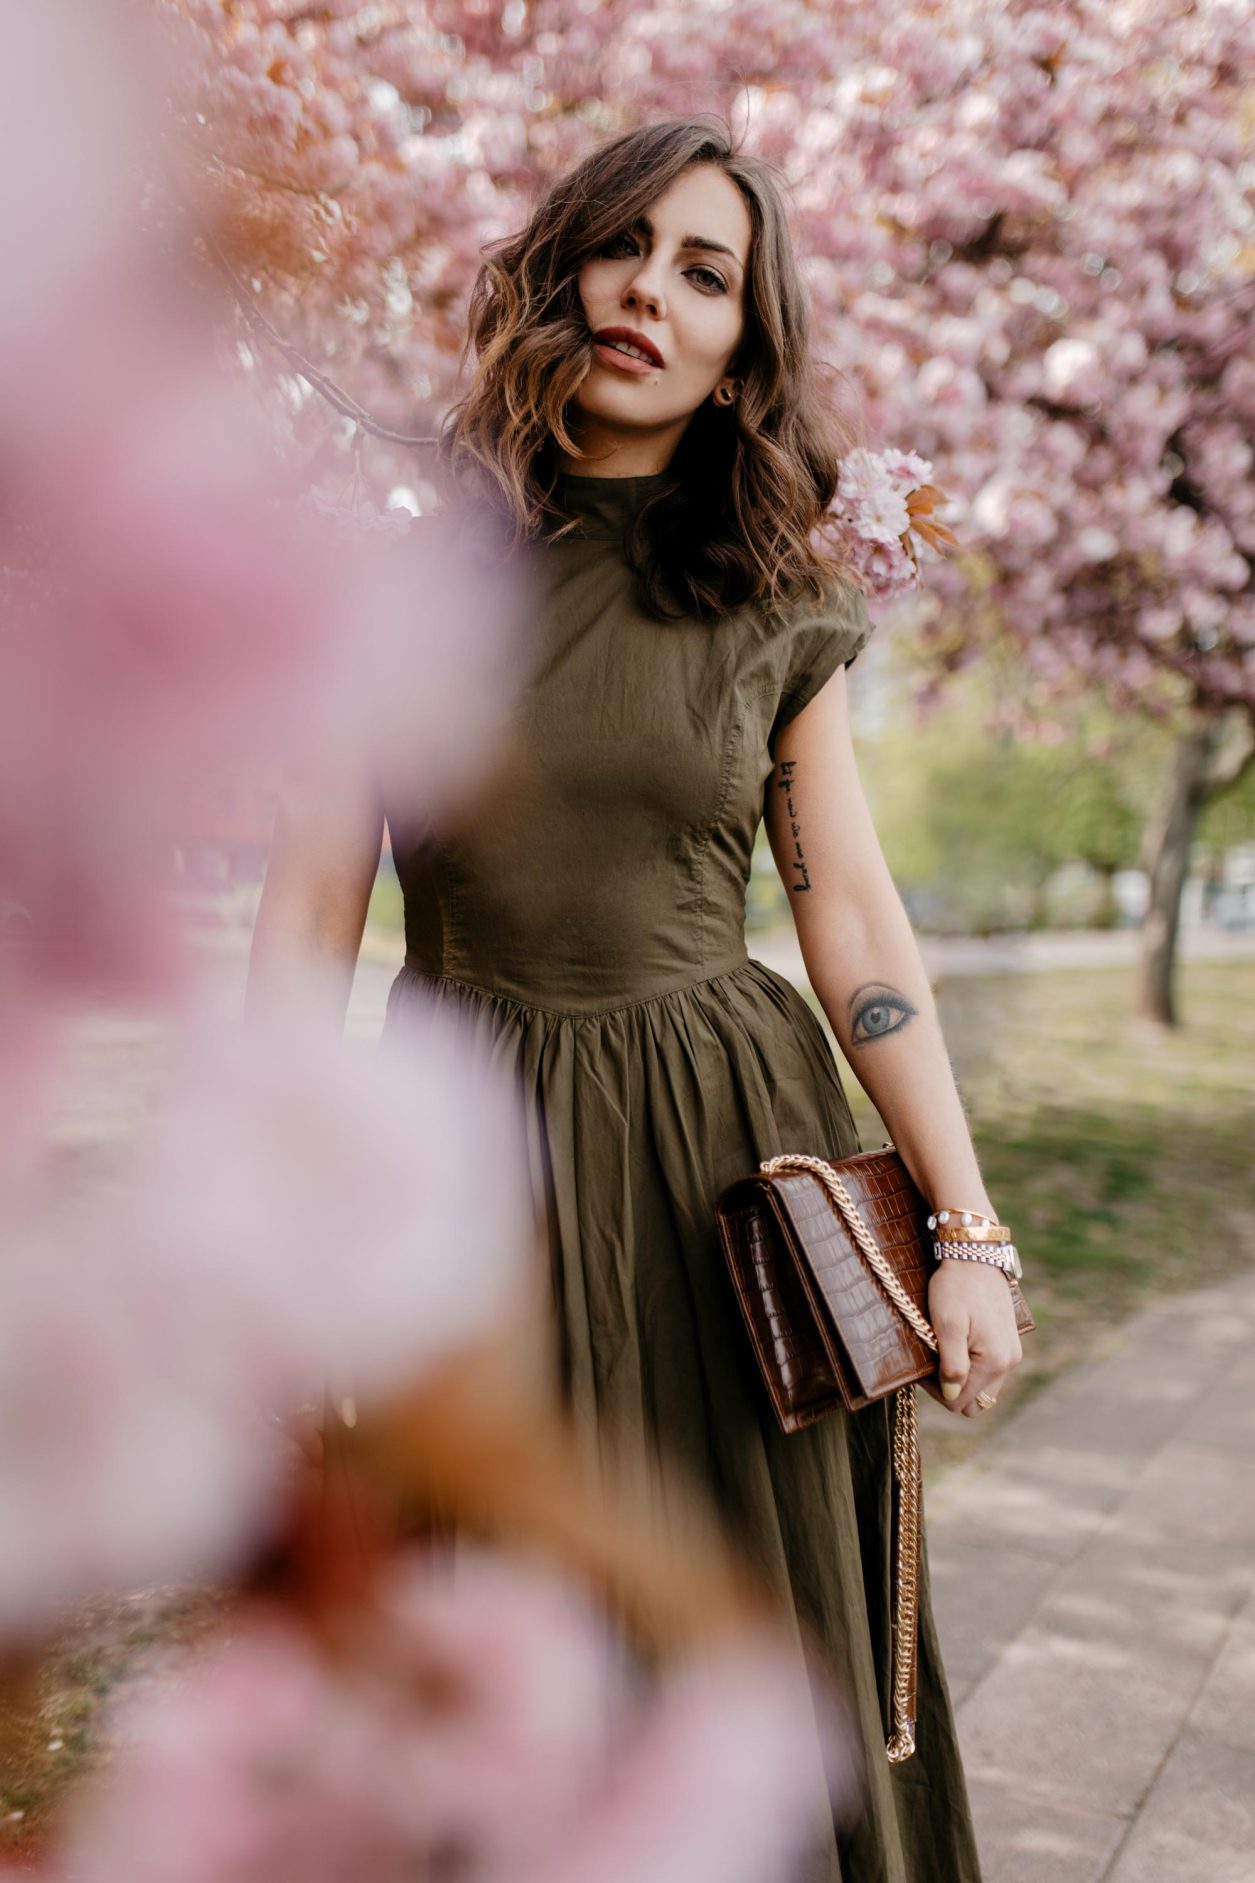 Anzeige | Streetstyle by fashion blogger Masha Sedgwick | Wearing khaki green midi dress with open back by Gestuz, black heeled sandals from Office via Zalando, brown leather cross-body bag with golden chain from Agneel | Minimalistic effortless cool outfit, city chic look, shooting spot: Berlin, cherry blossom